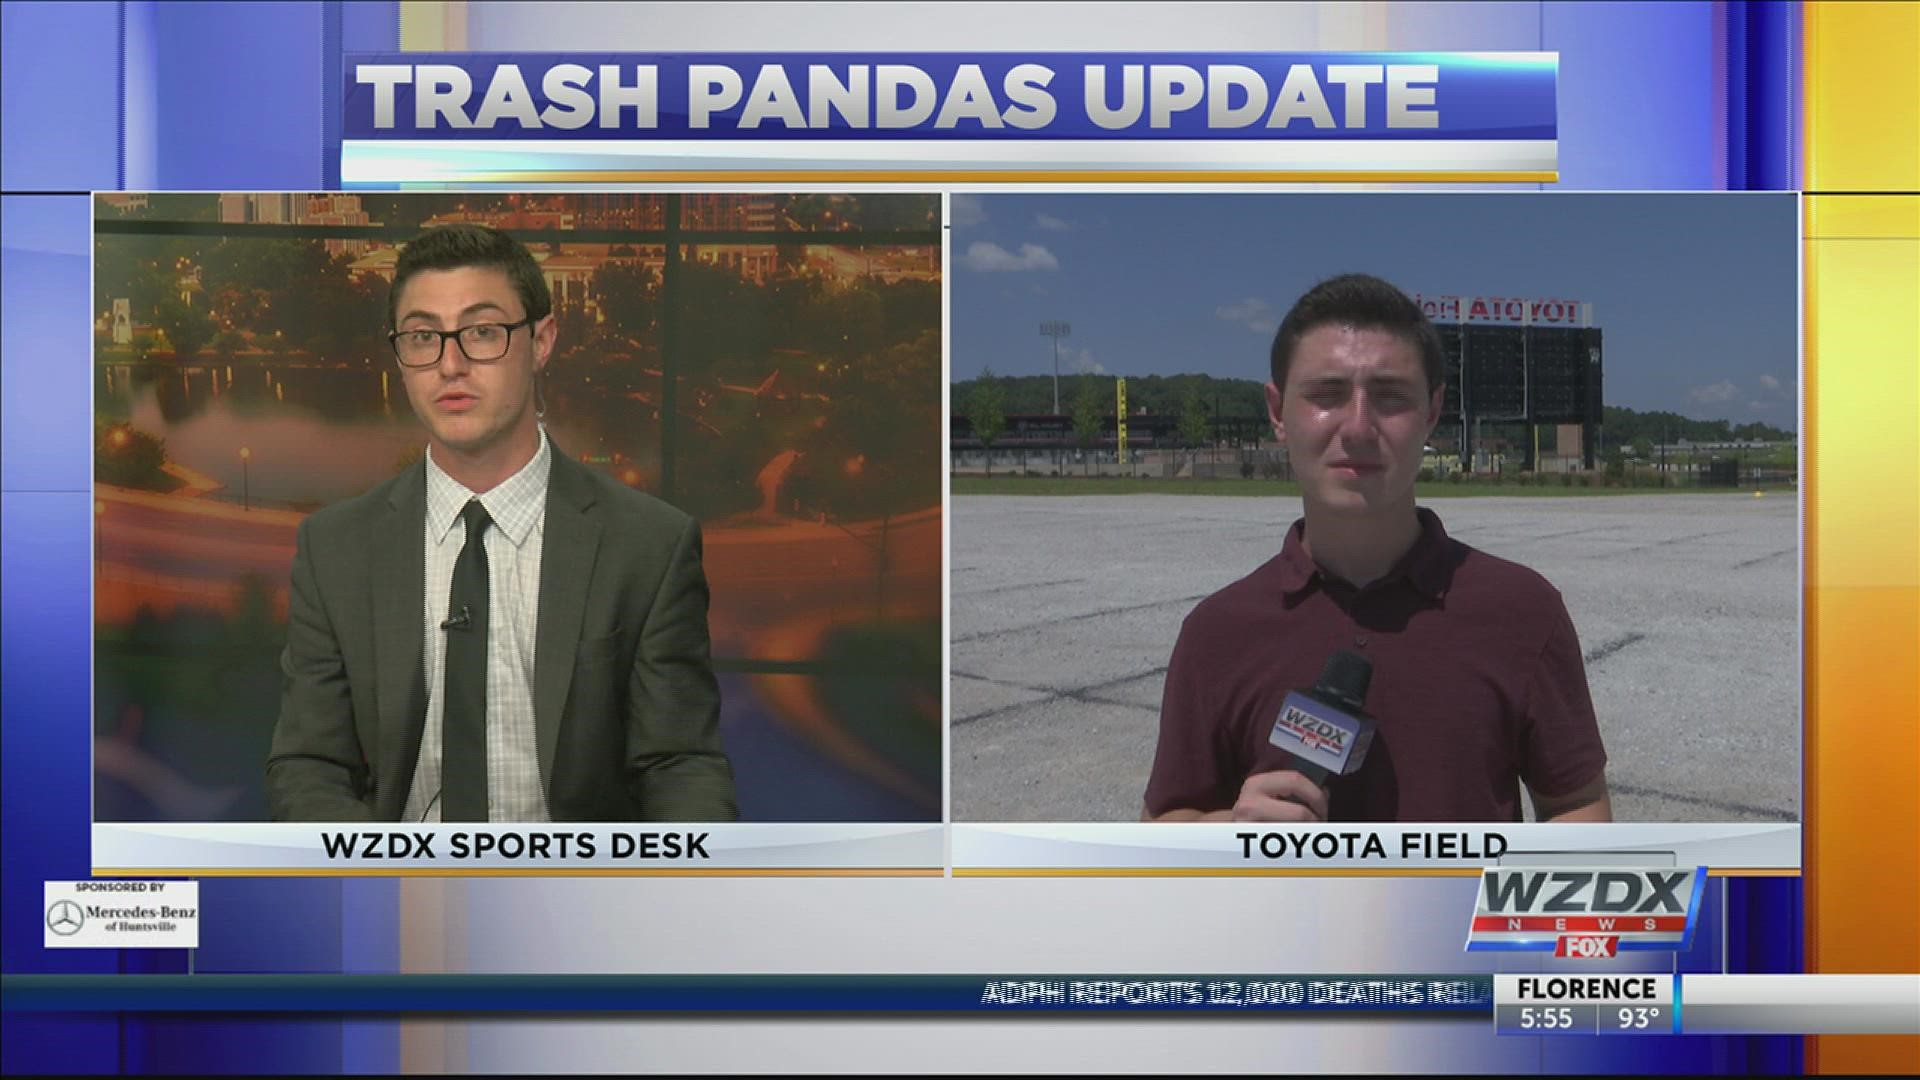 Jonah Karp talks to Jonah Karp who spoke to some Trash Pandas about their place in the standings.